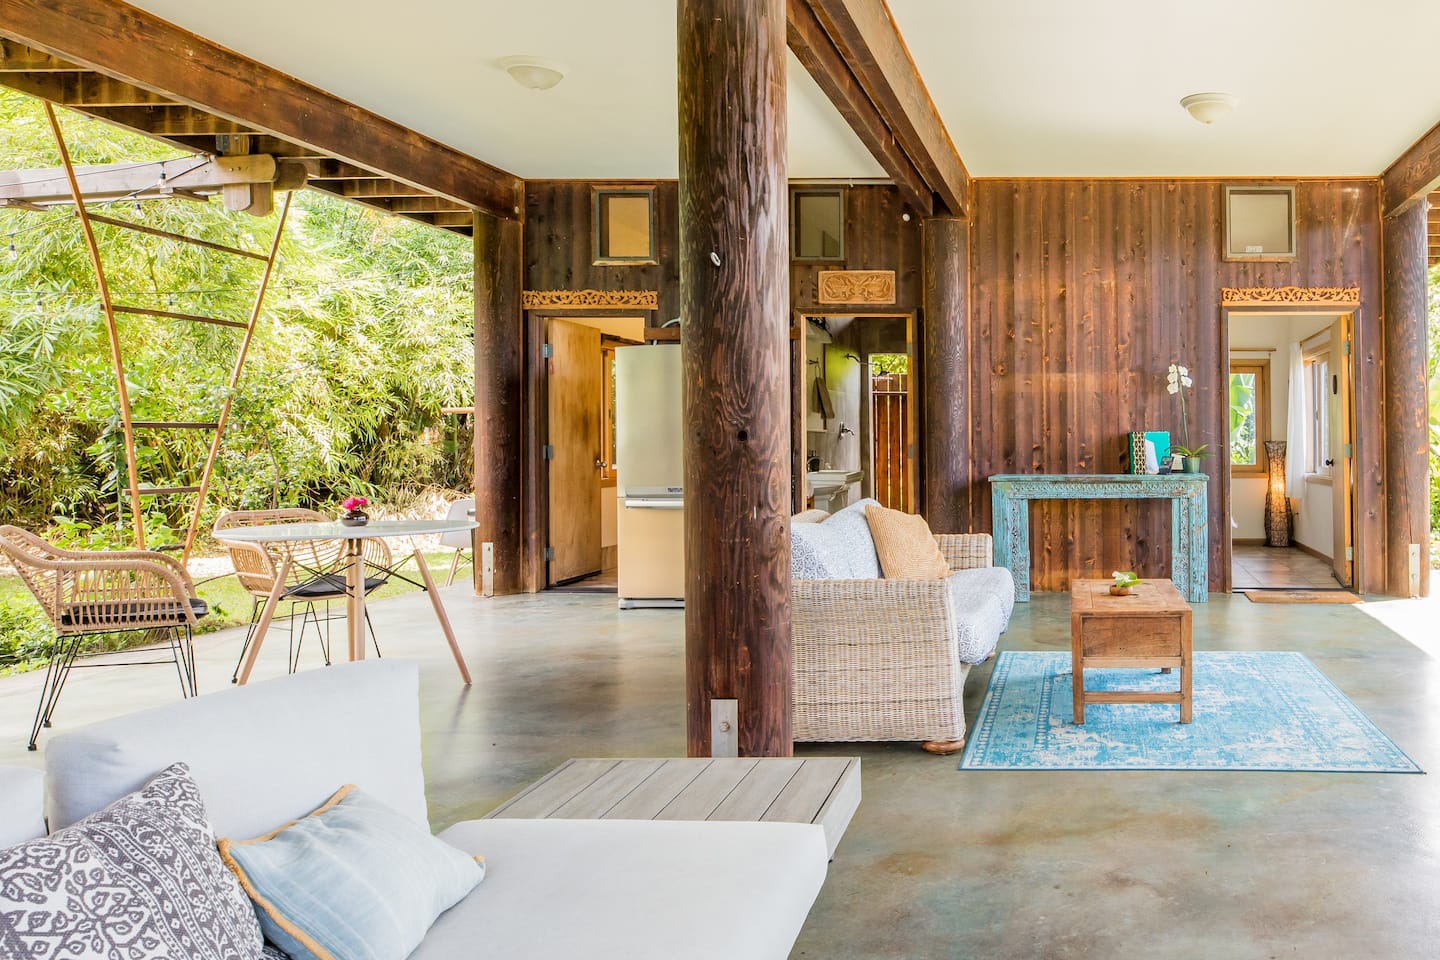 Tropical Garden Retreat on an Organic Mango Farm, one of the Best Airbnbs in the United States